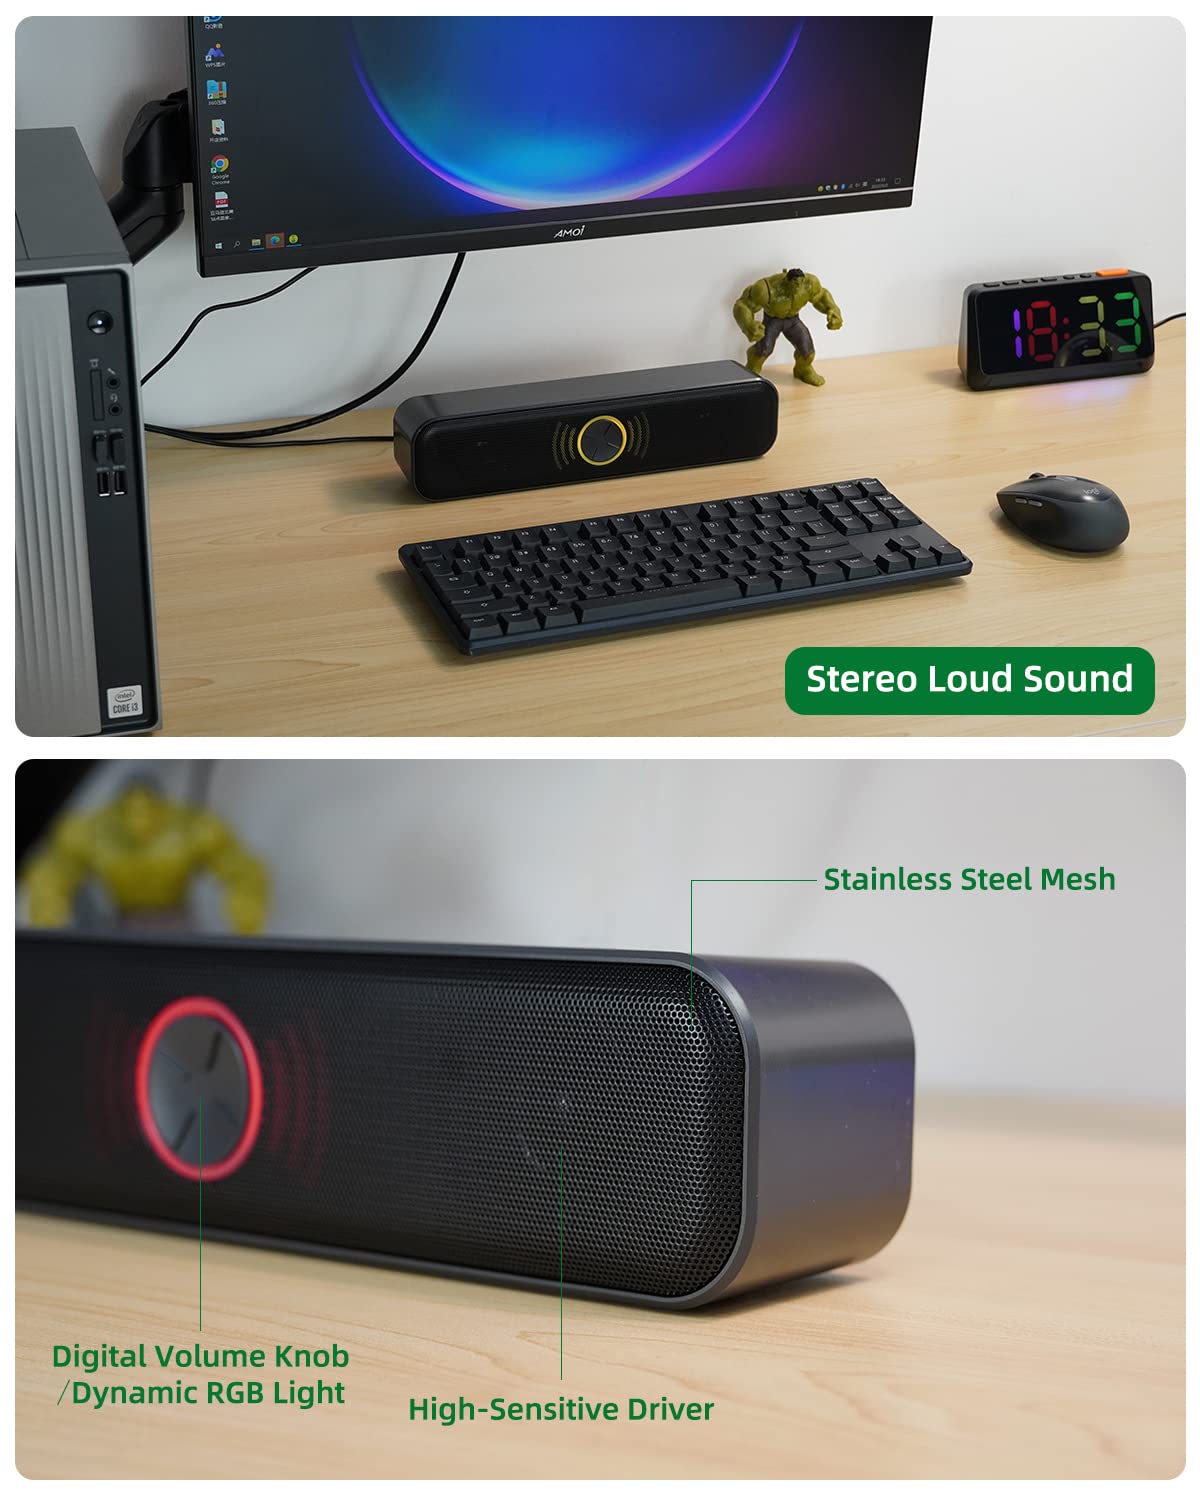 YOFANQI USB Computer Speakers for Desktop, Laptop, PC Gaming Speakers, Small Computer Sound Bar with Stereo Loud Sound, Enhanced Bass, Dynamic RGB Light, Digital Volume Knob